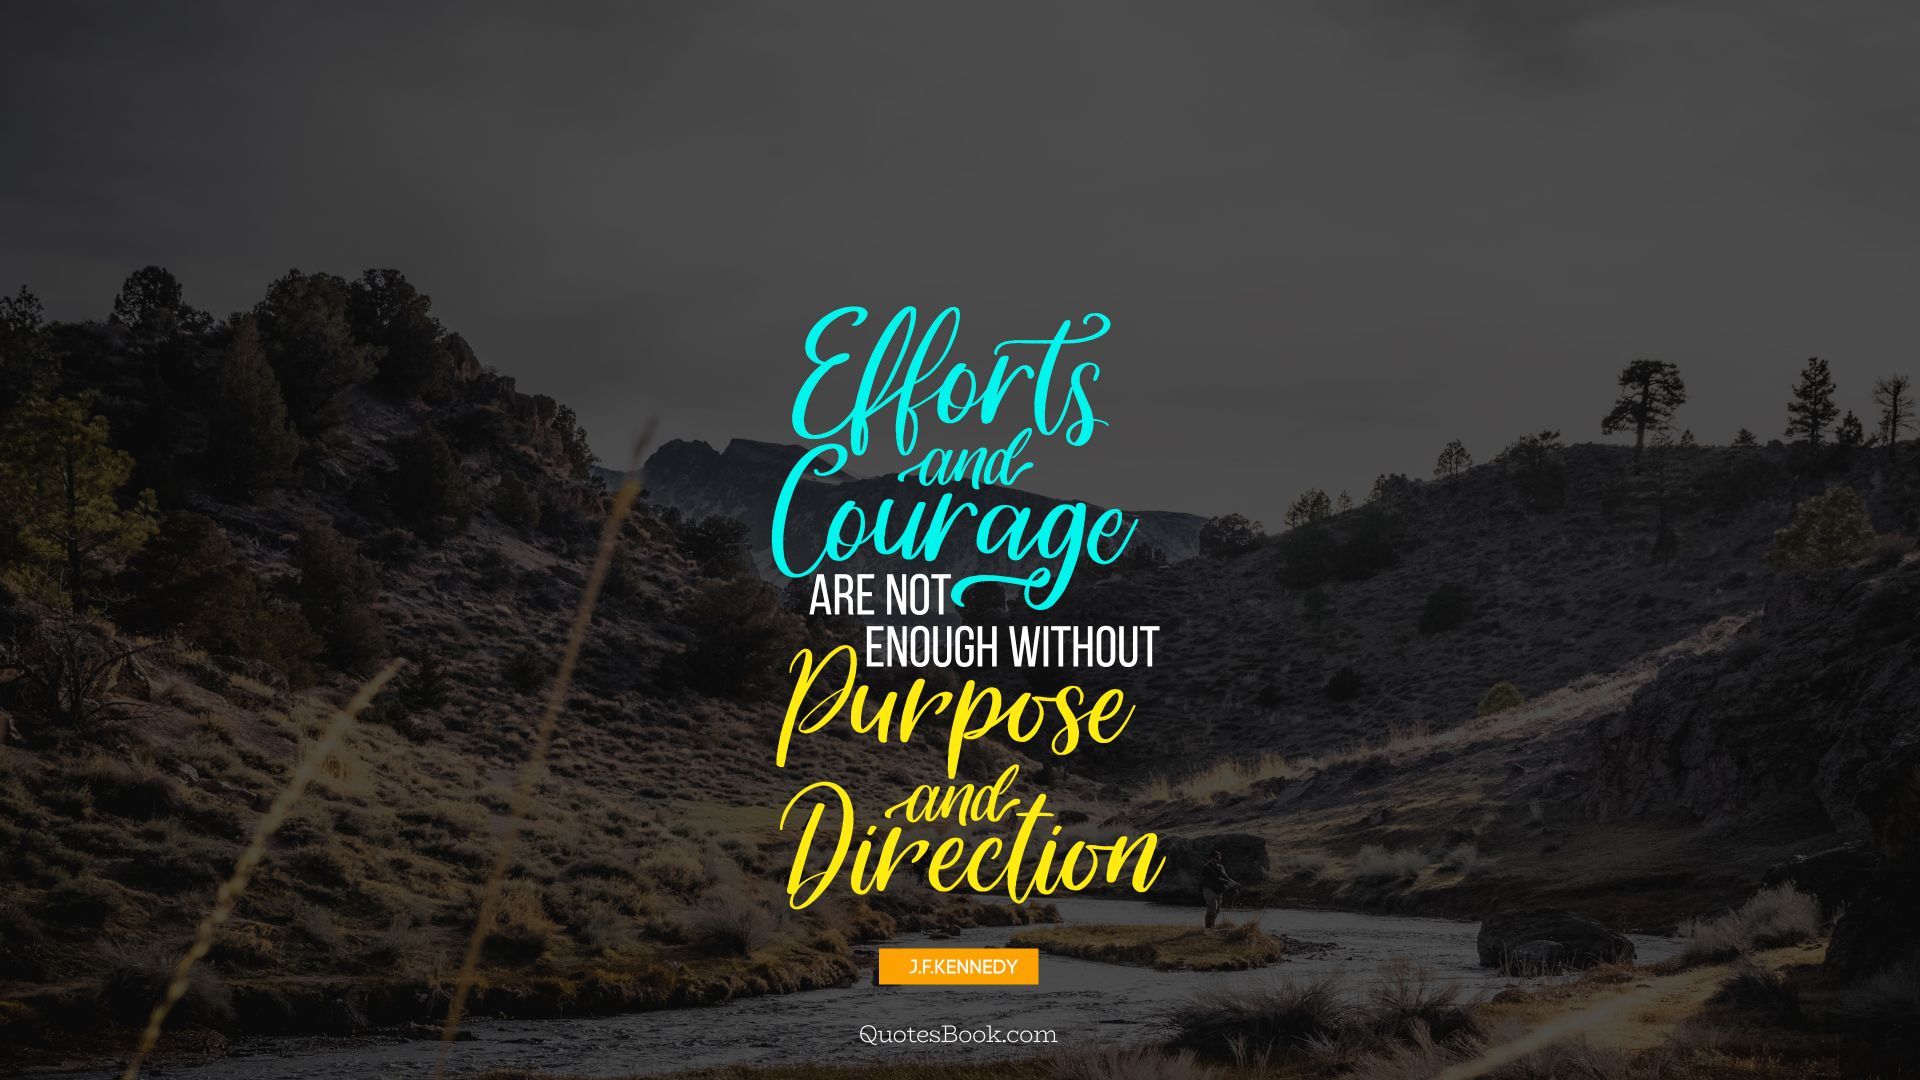 Еfforts and courage are not enough without purpose and direction. - Quote by John F. Kennedy